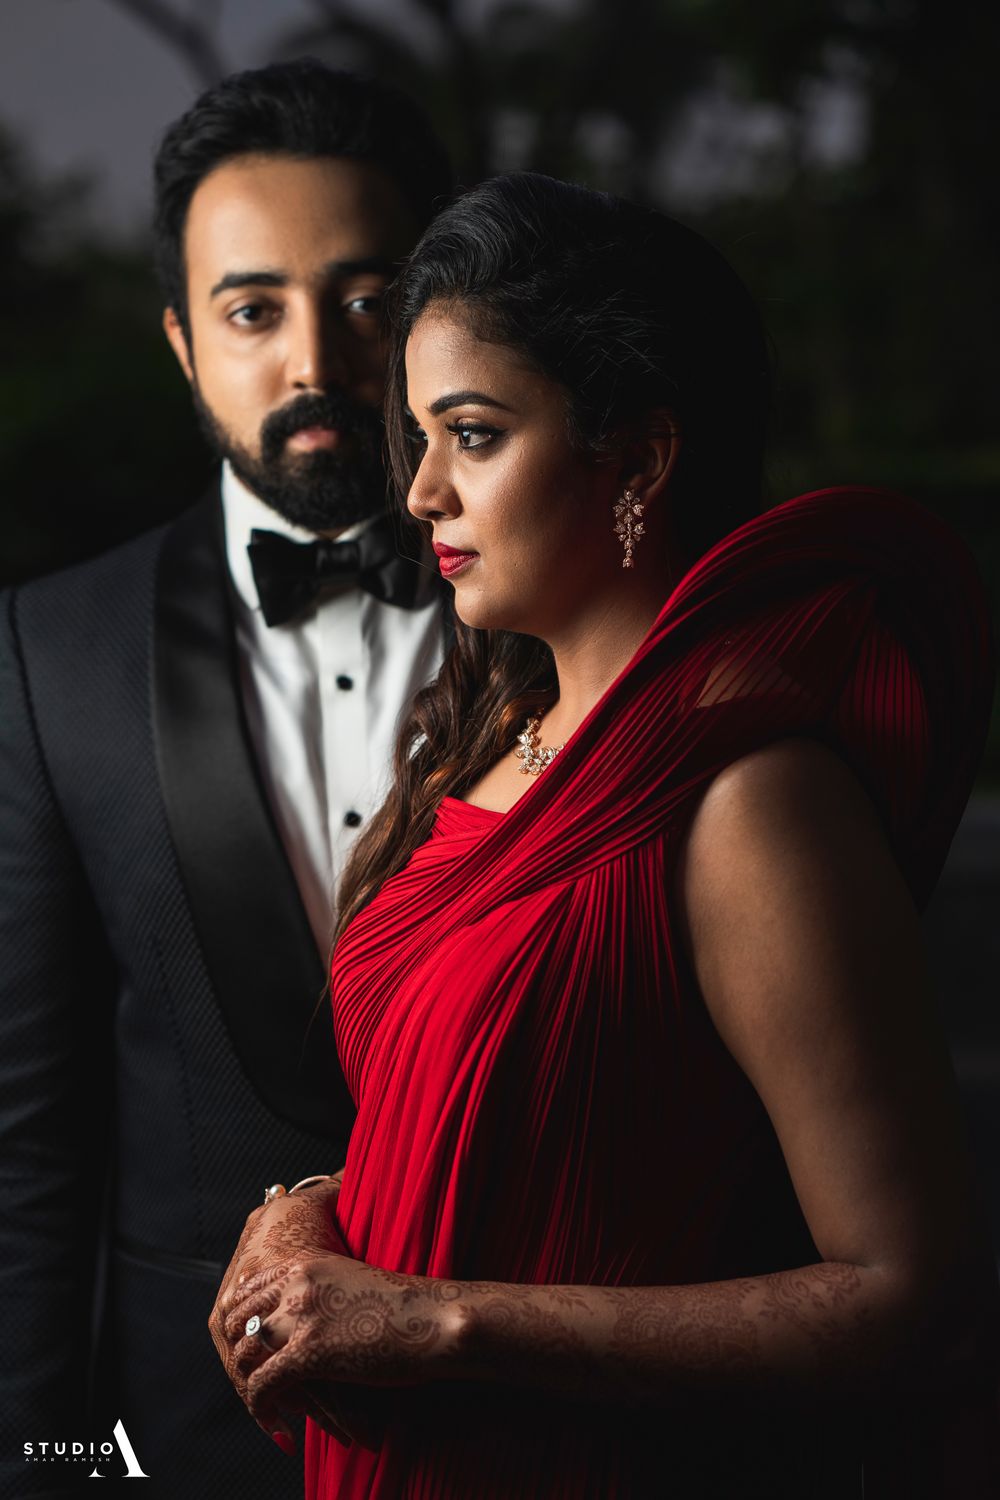 Photo of Couple portrait with bride in red gg gown